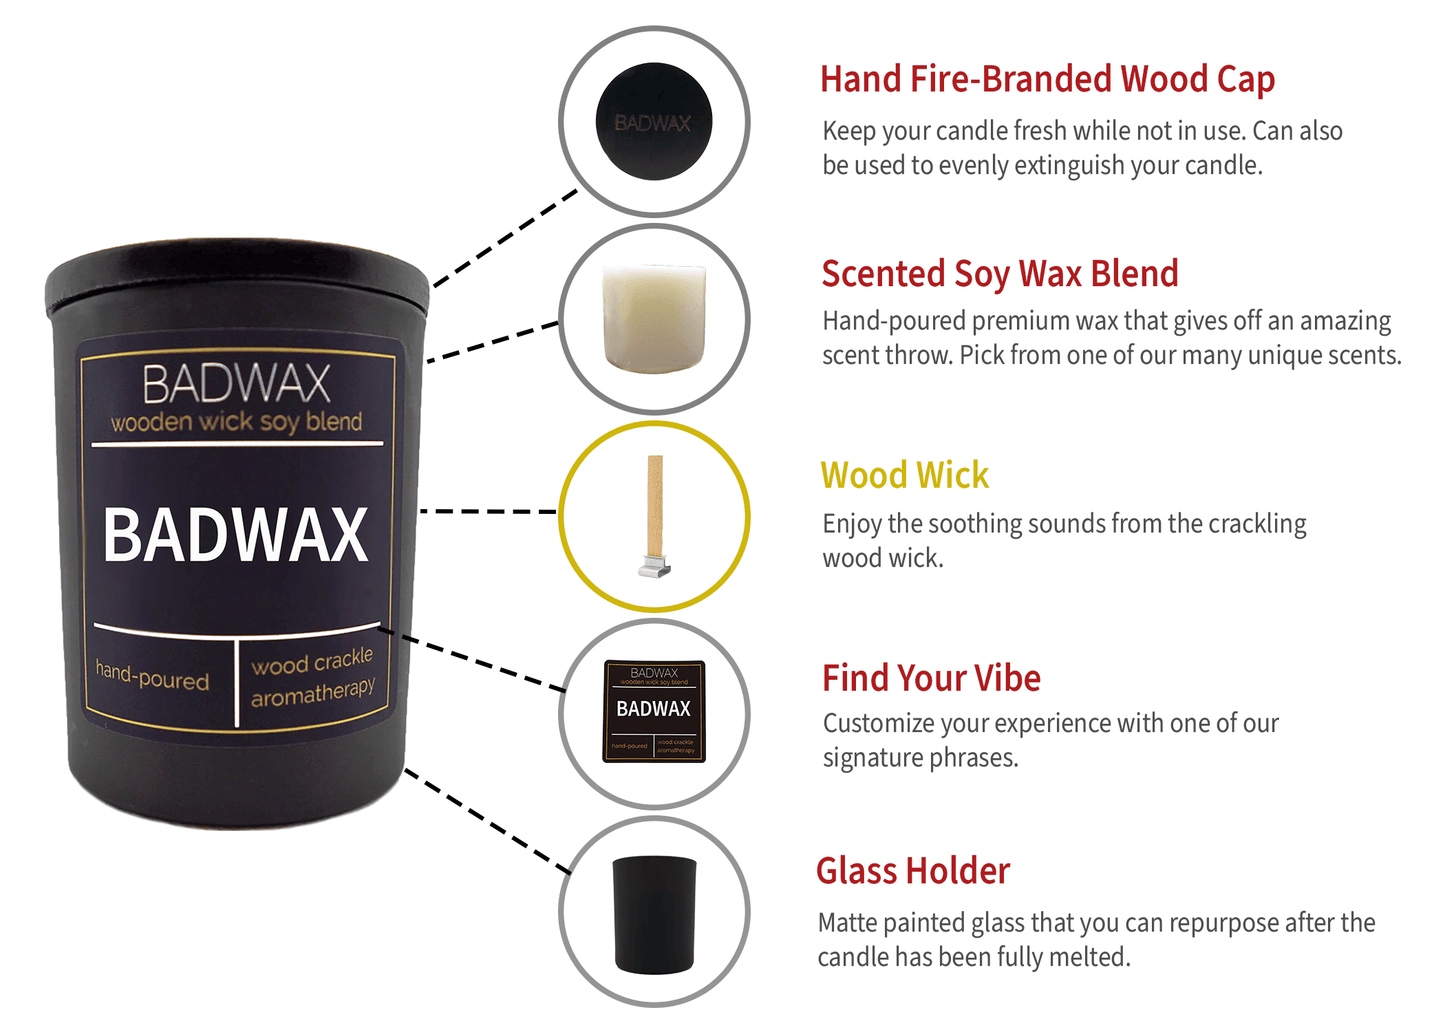 Passion Fruit + Guava + Teak | Woodwick Candle - BADWAX